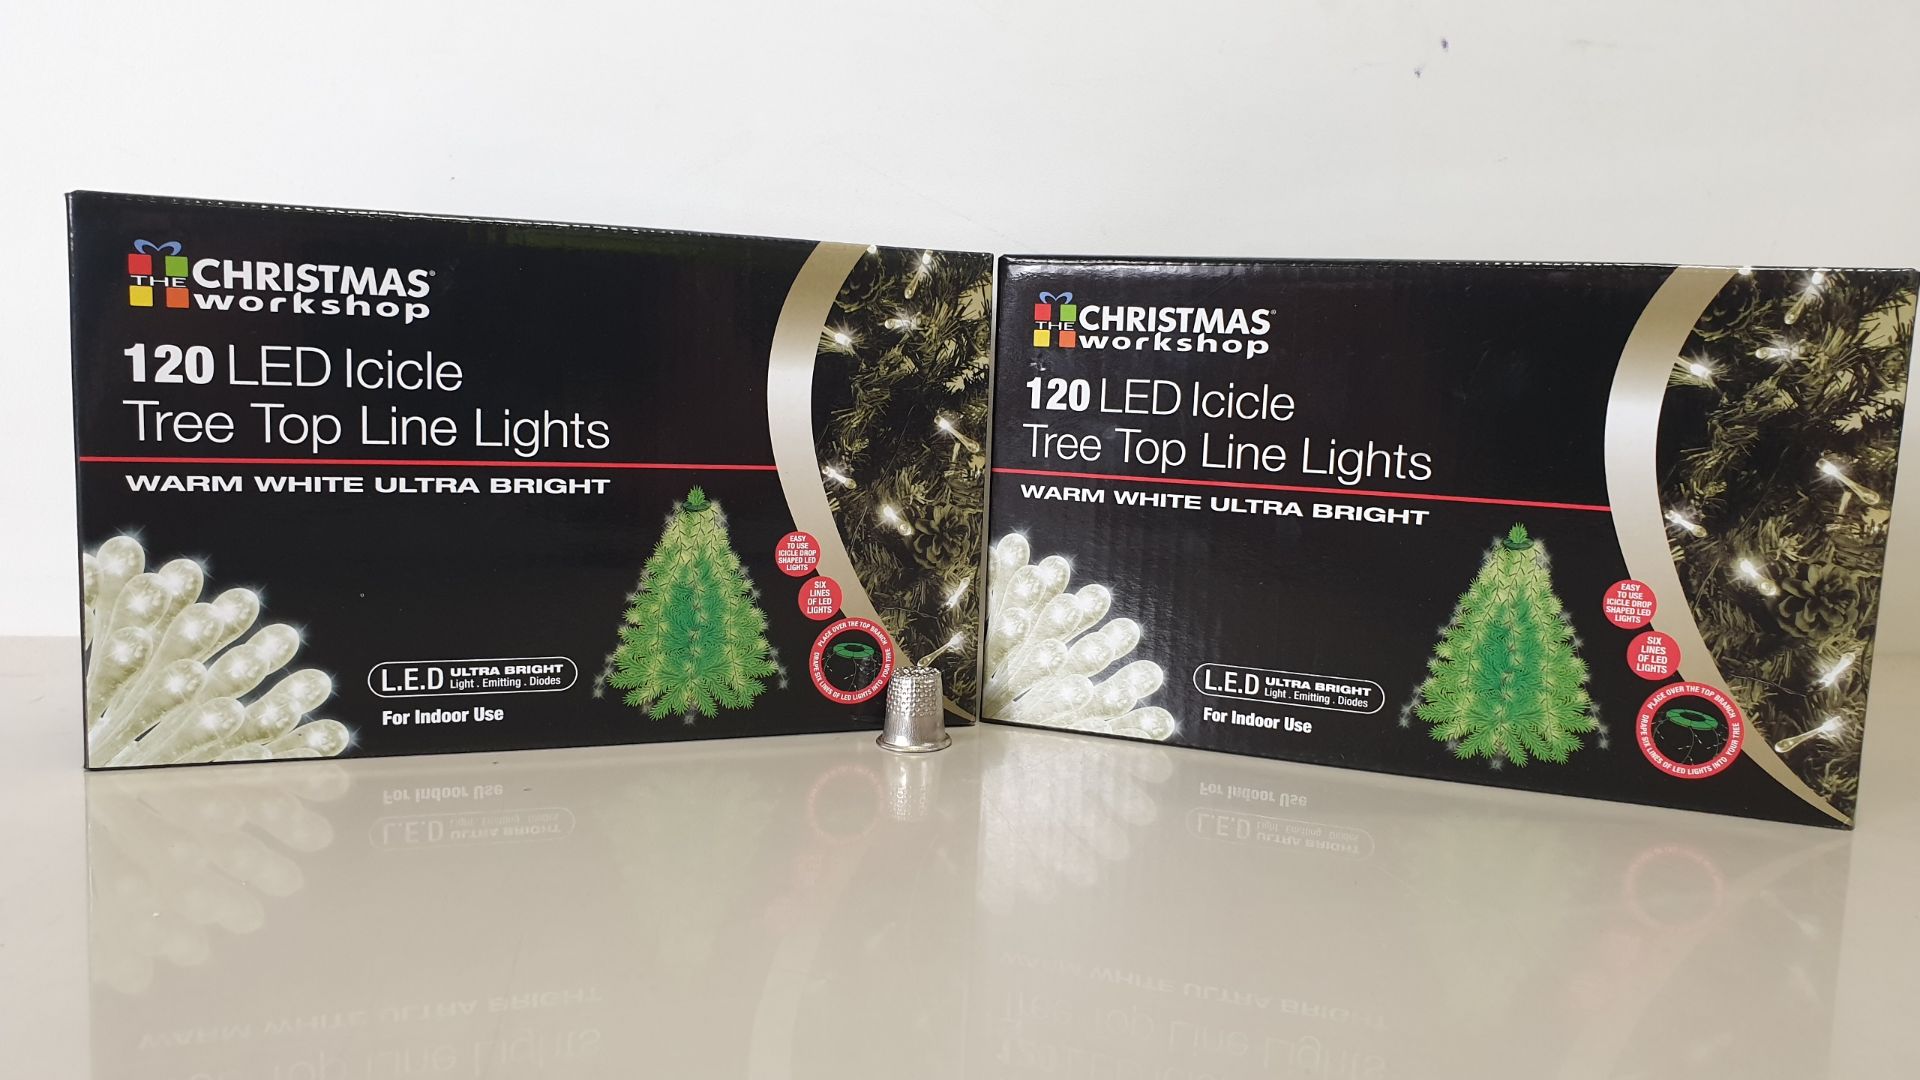 24 X BRAND NEW THE CHRISTMAS WORKSHOP 120 LED ICICLE TREE TOP LINE LIGHTS, WITH WARM WHITE ULTRA